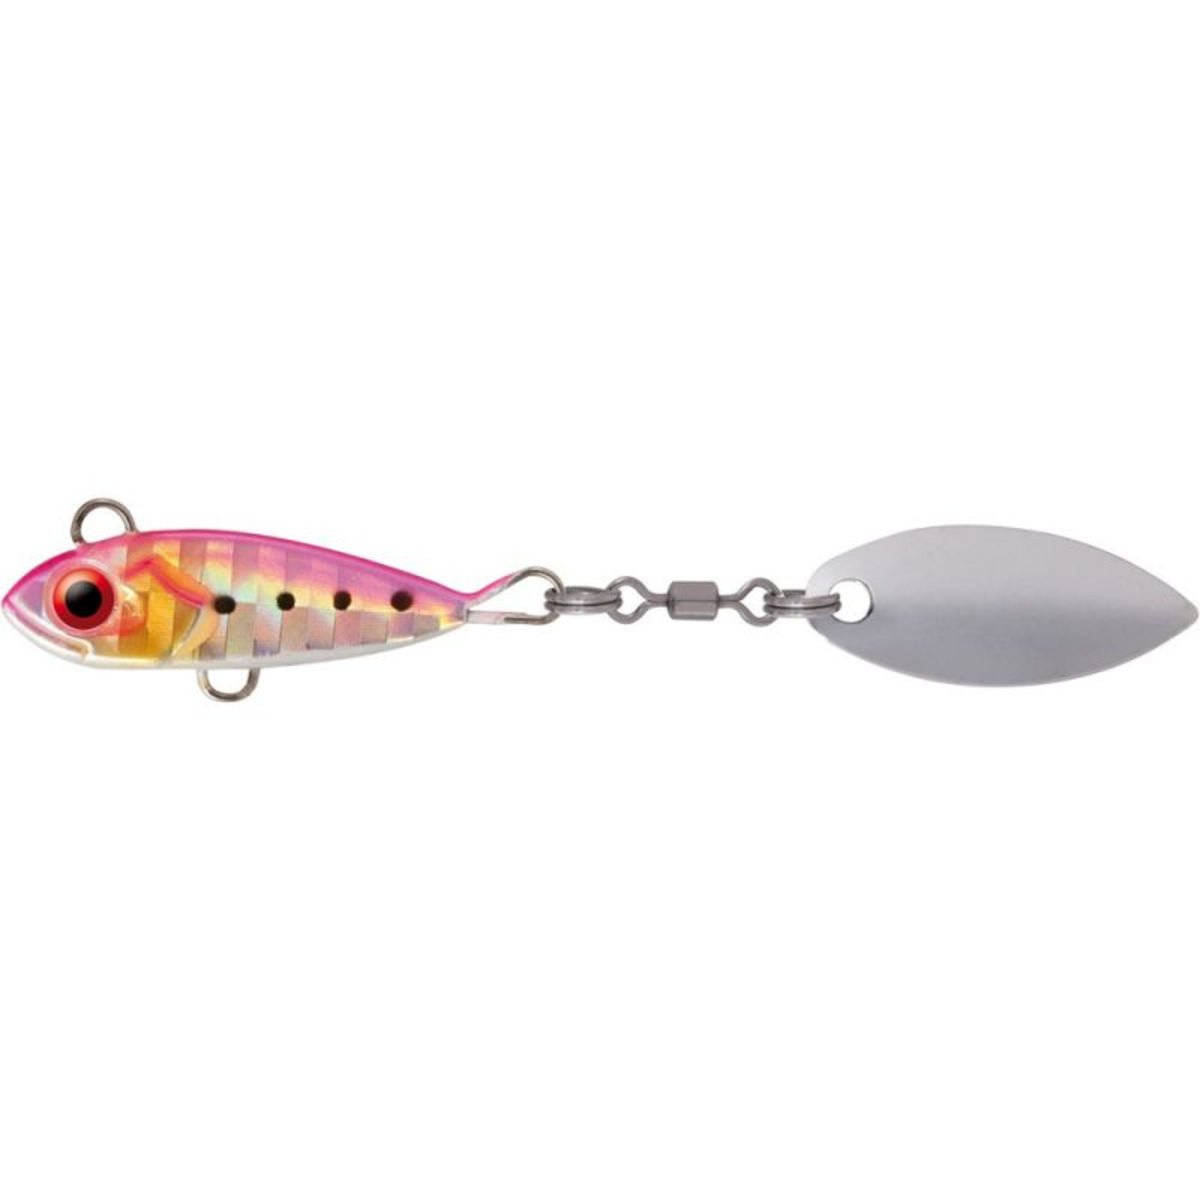 Rapture Spin Jig - 3.0 g - 21 mm - Holo Pink